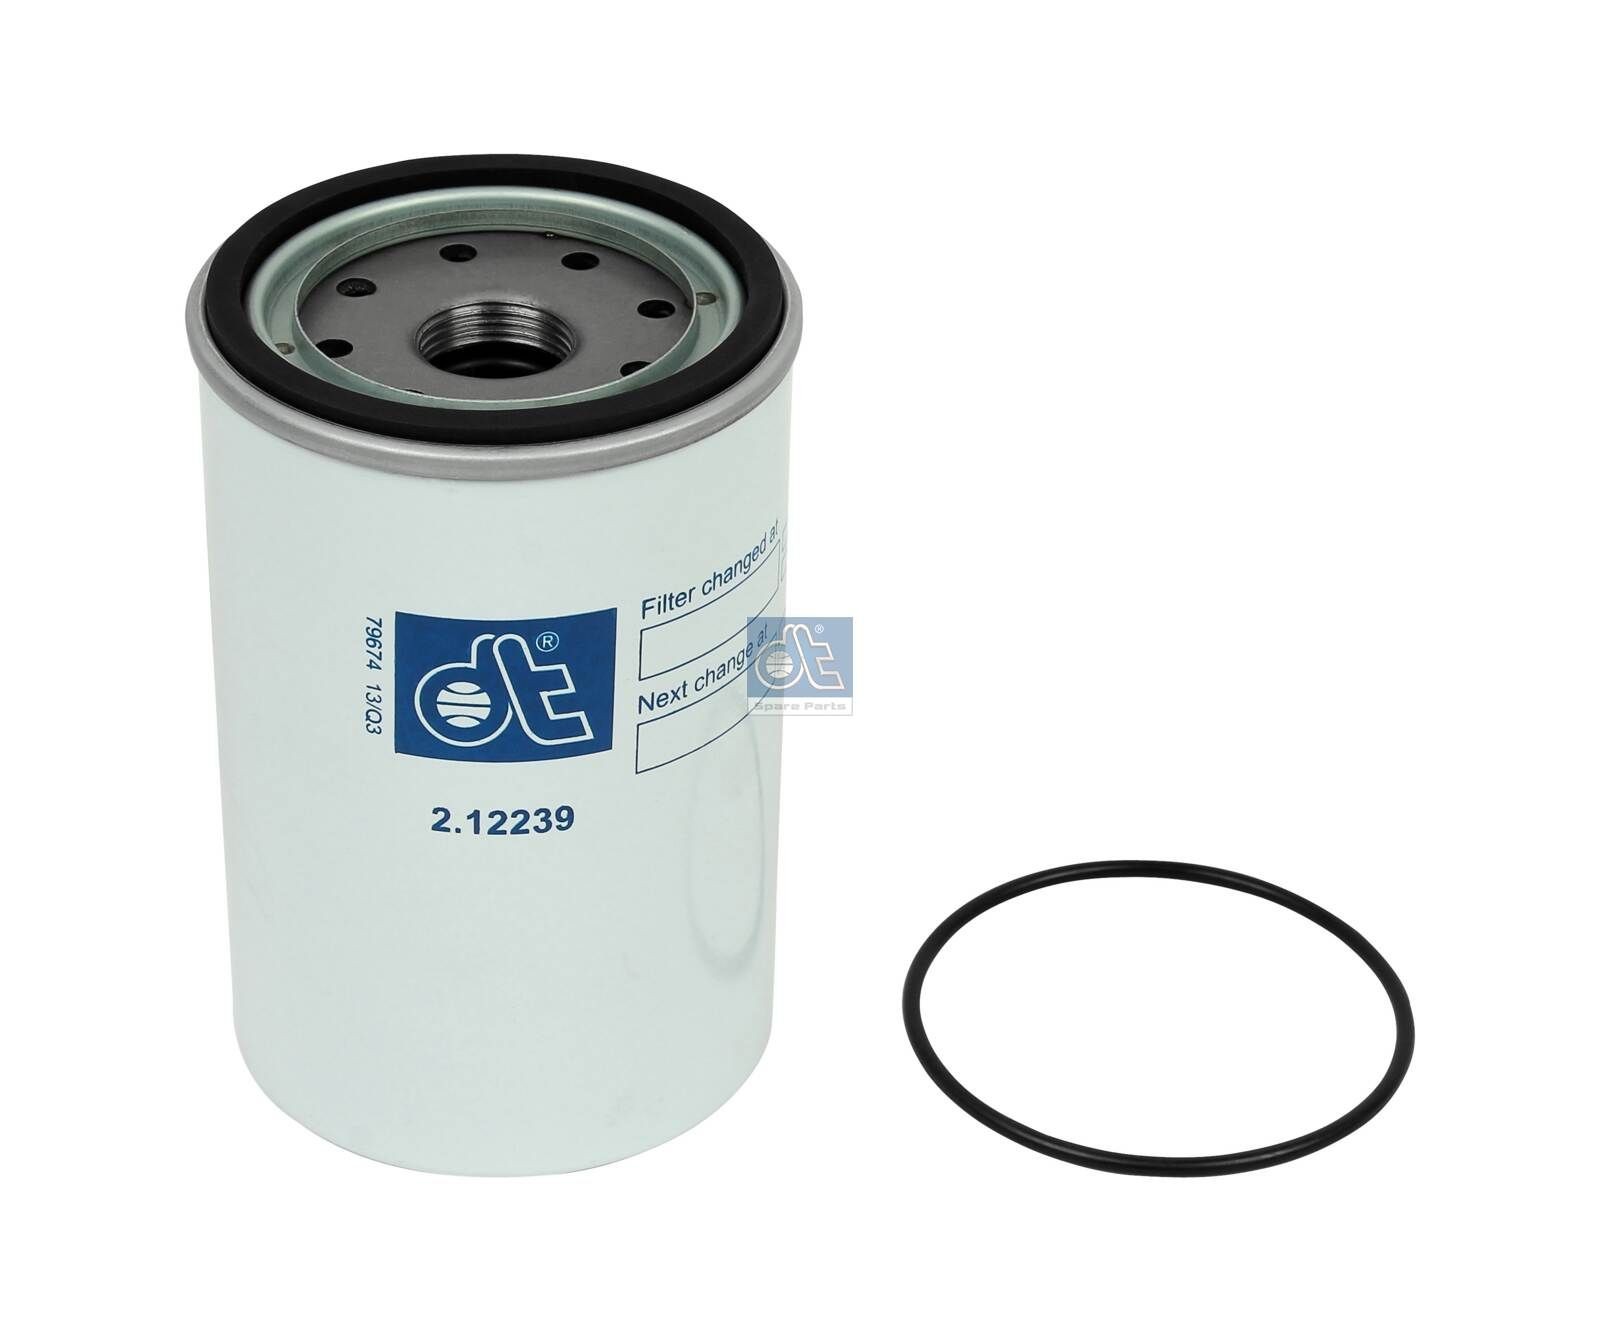 WK 940/33 x DT Spare Parts 2.12239 Fuel filter 2 0998 346